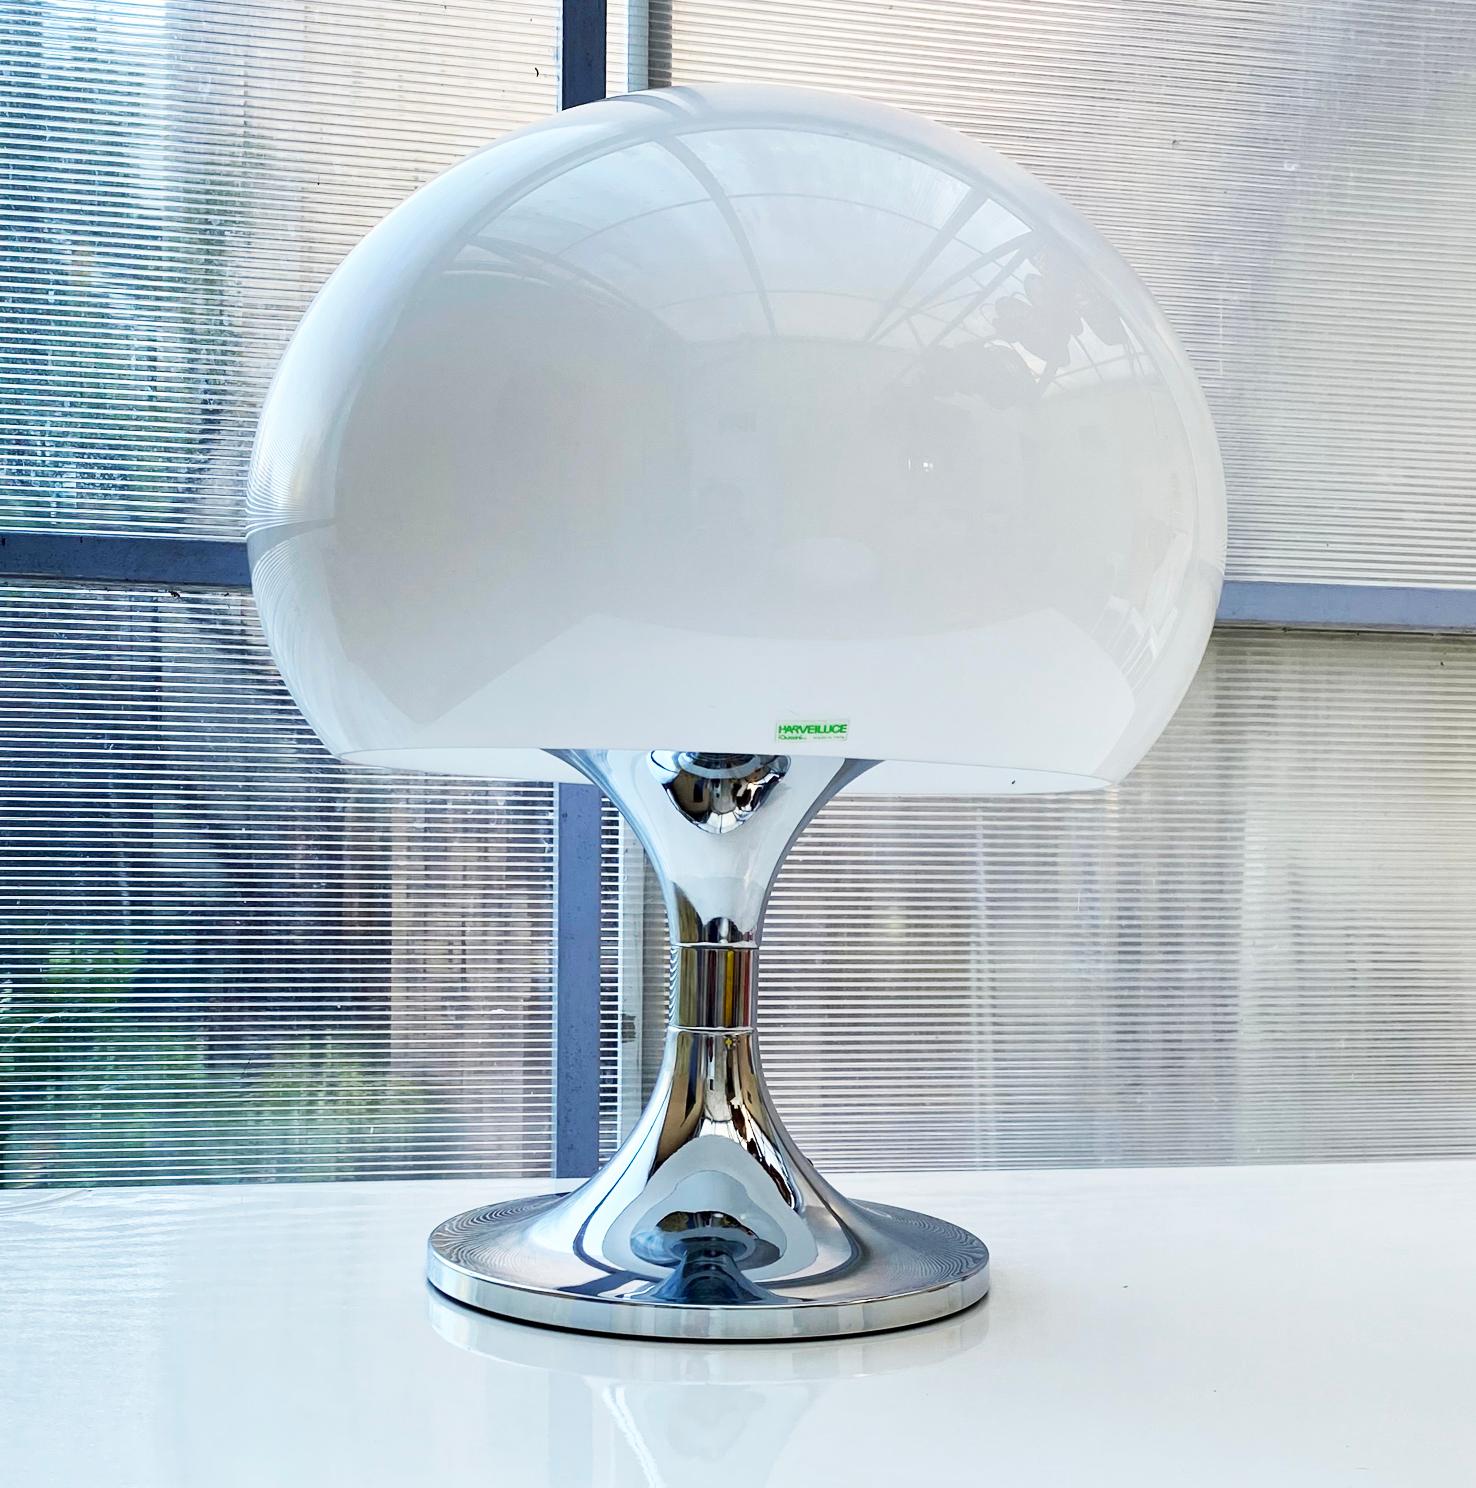 Duetto lamp by Luigi Massoni produced only from 1972 to 1976
Publisher: Harveiluce (Harvey Guzzini)
Color: white and chrome
Materials: Chrome round concave base and stem. . Mushroom globe shade in white acrylic. Chrome lid and ornamental nut on